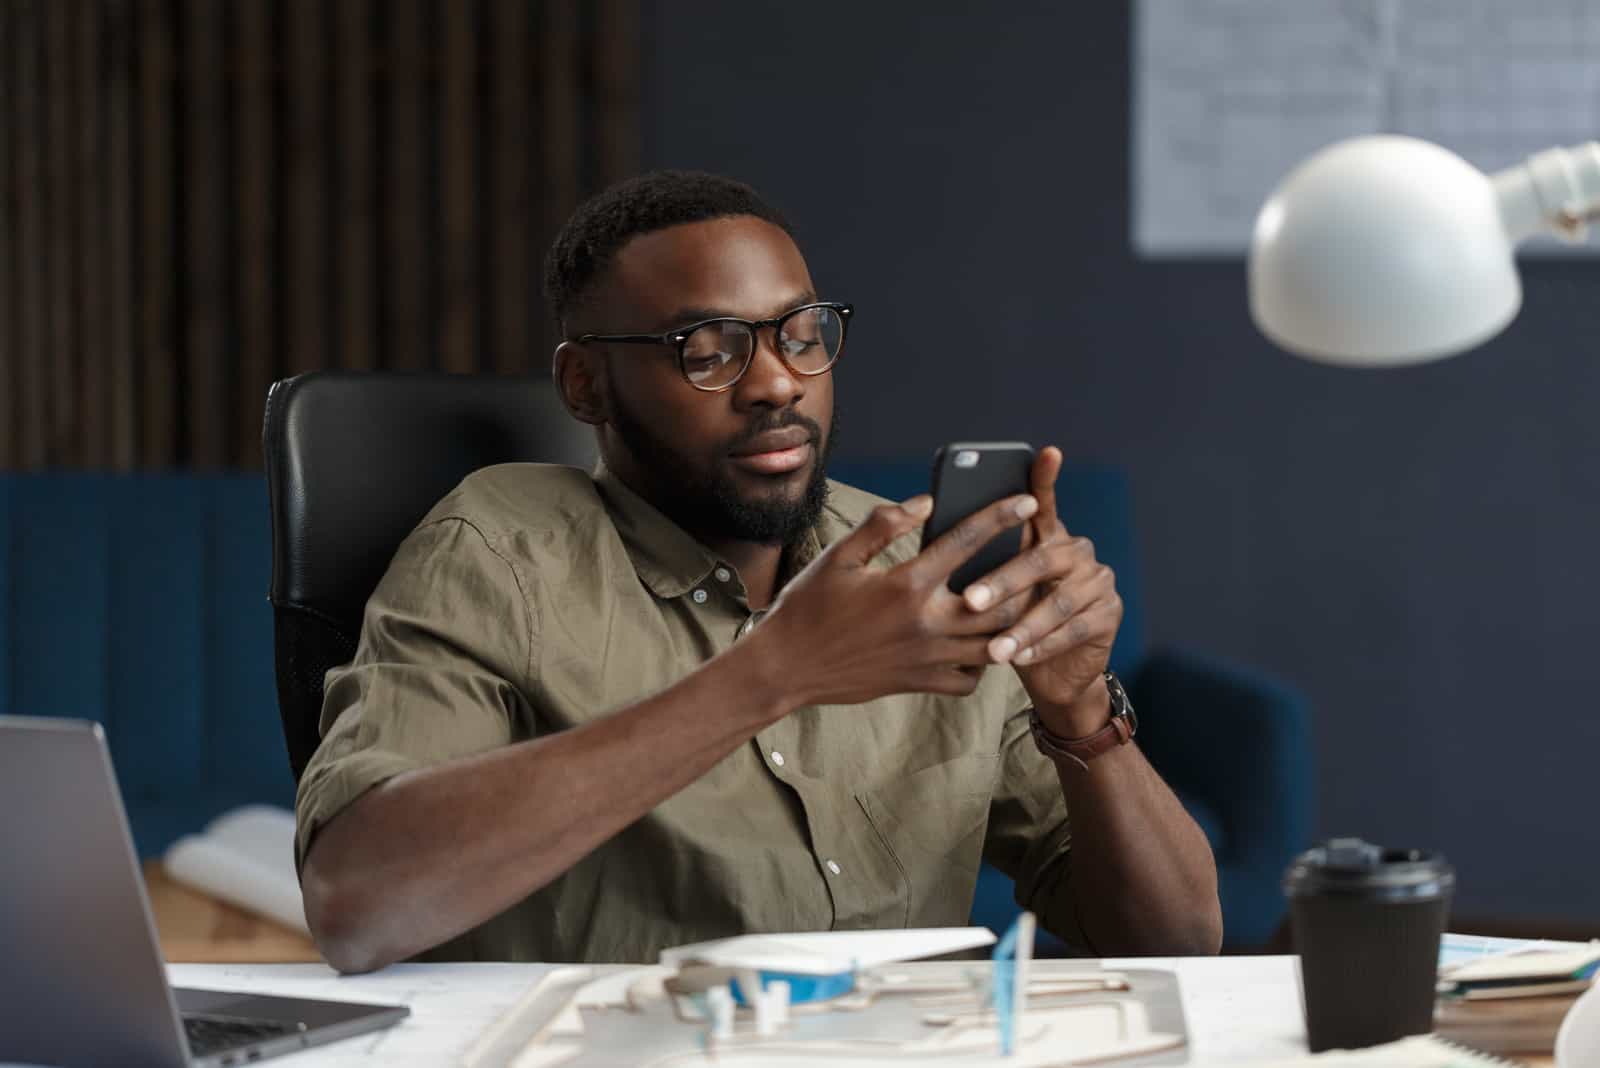 man making a break while working to text a girl